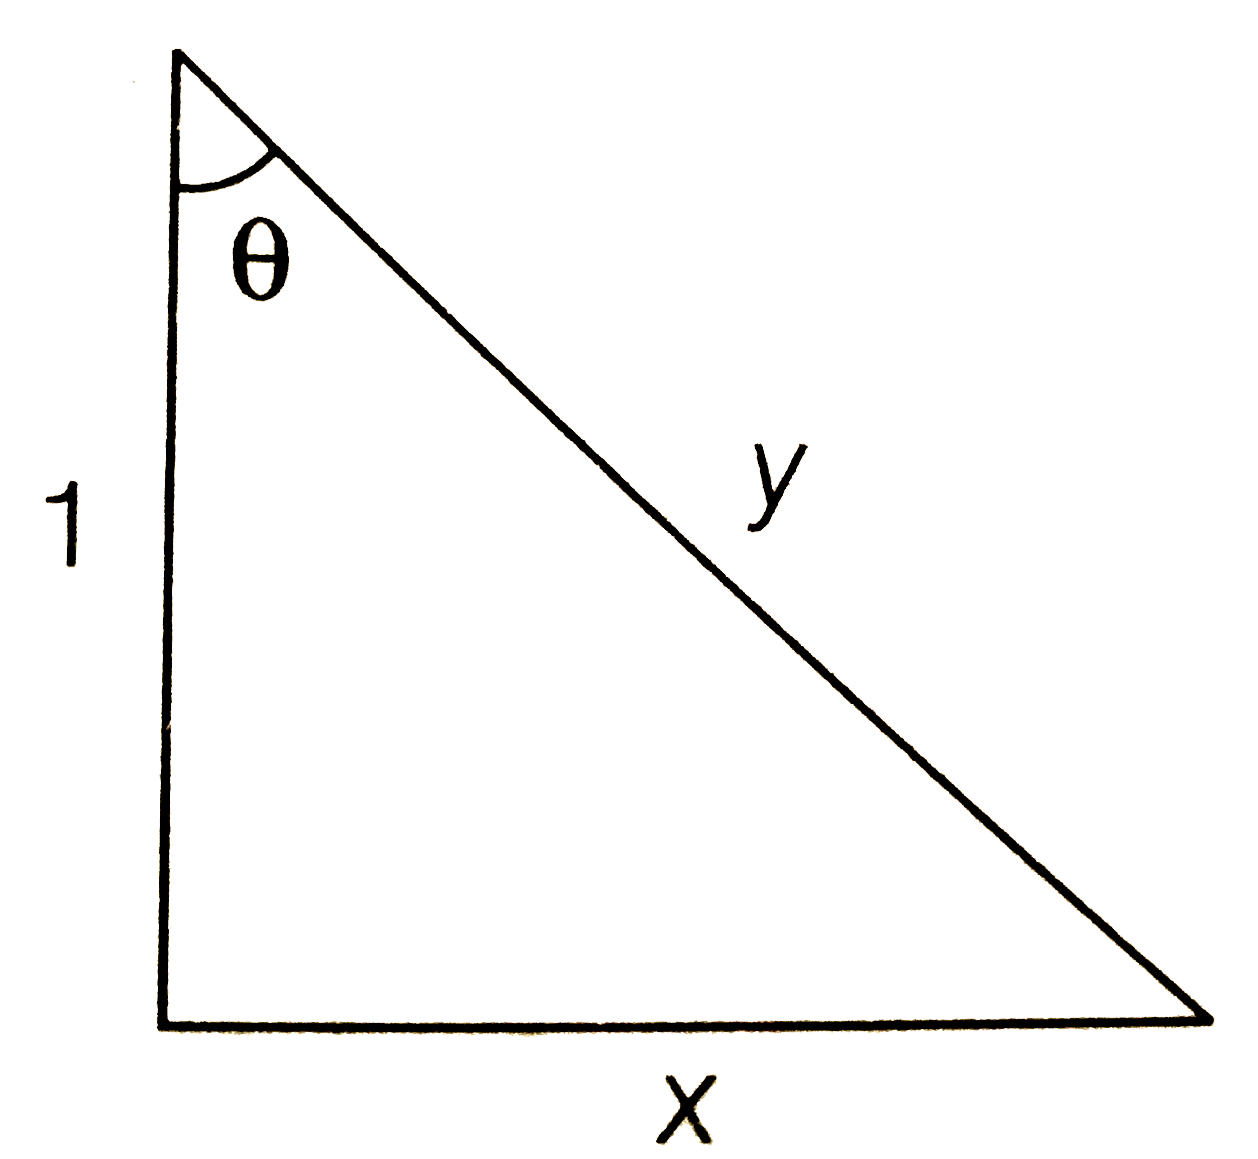 A right angled triangle has legs 1 and x. The hypotenuse is y and angle opposite to the side x is theta. Shown as